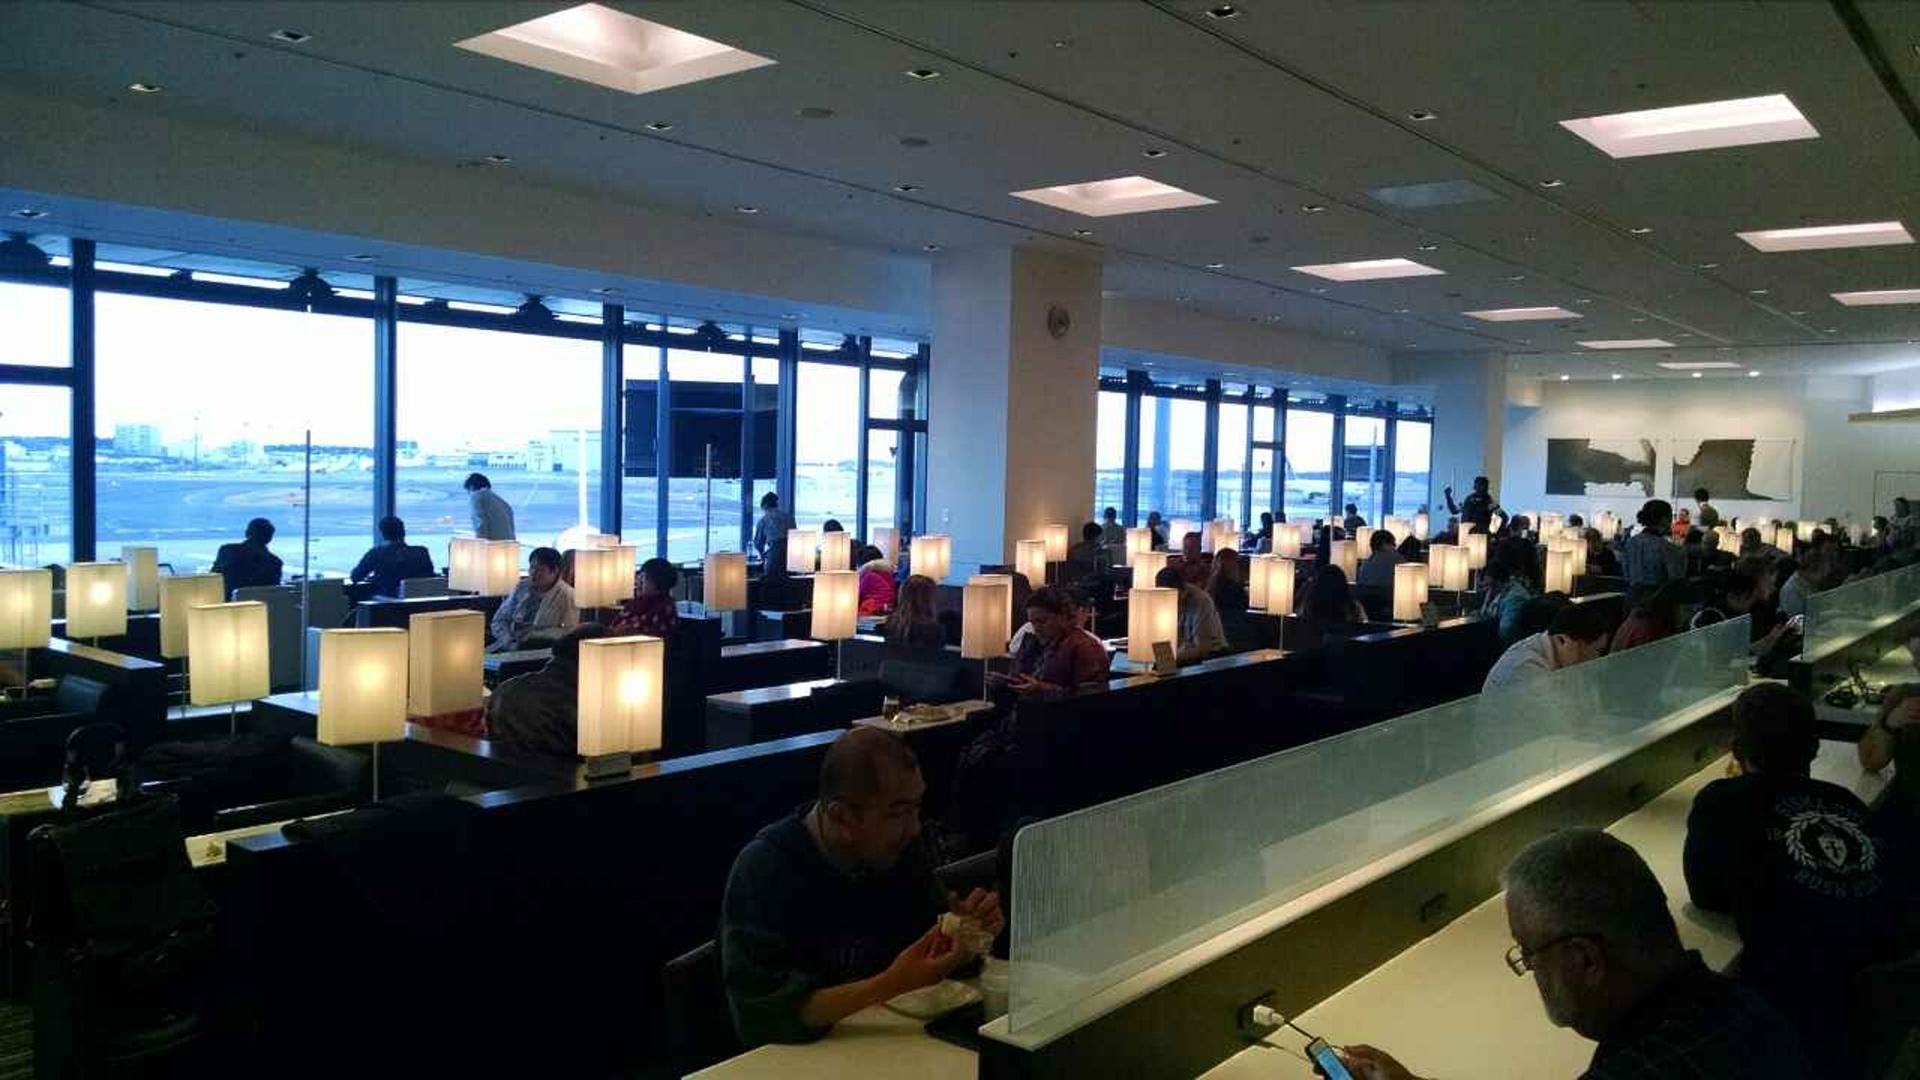 All Nippon Airways ANA Lounge image 27 of 39